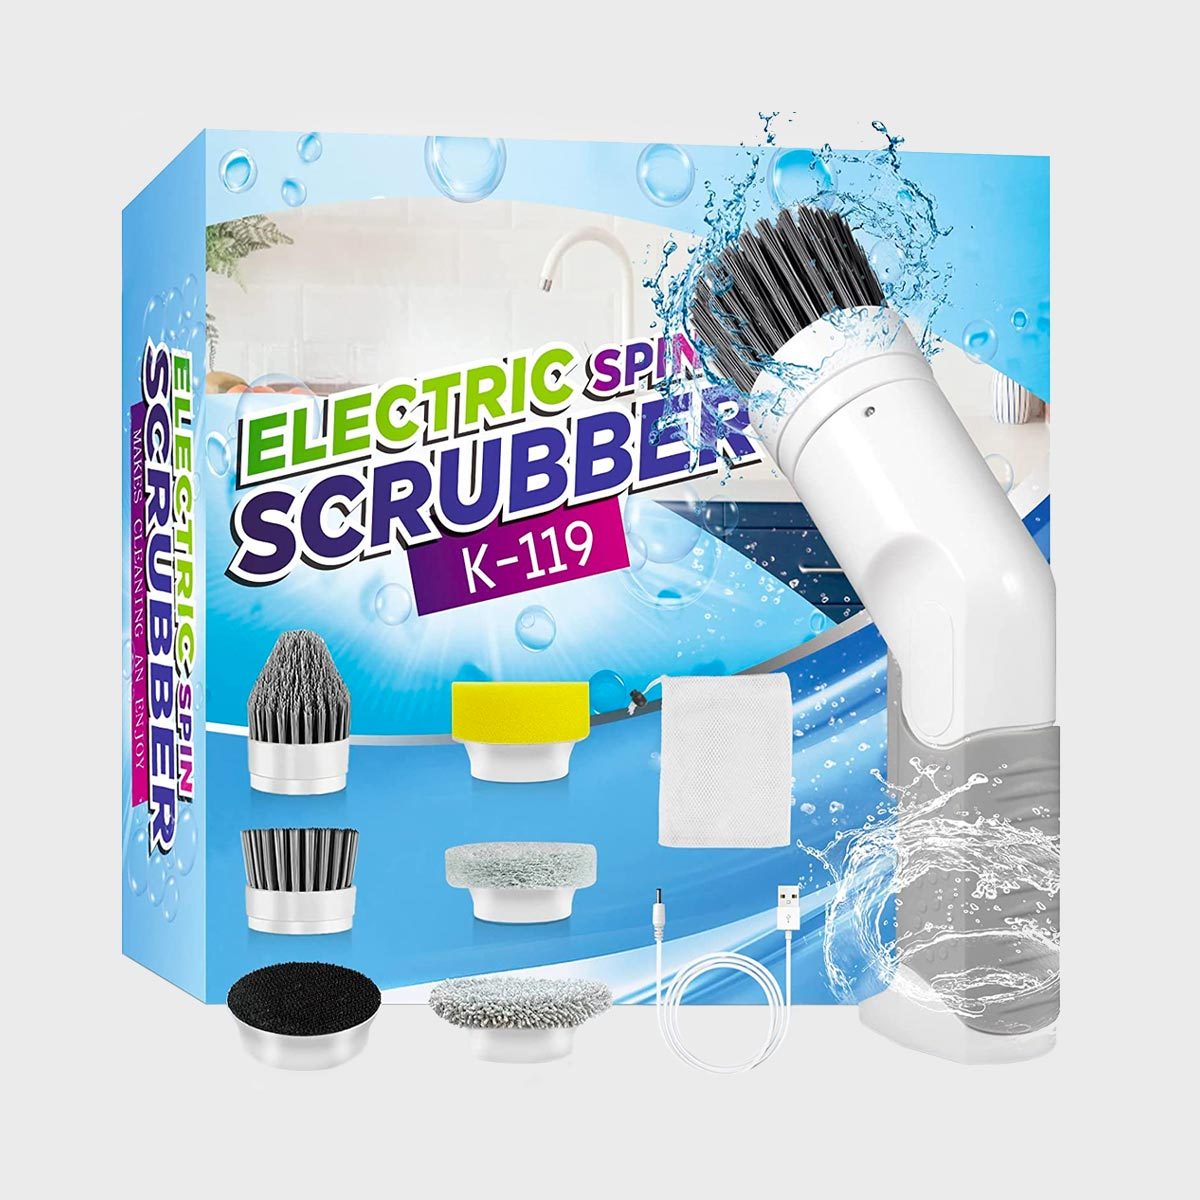 https://www.rd.com/wp-content/uploads/2021/01/Handheld-Electric-Spin-Scrubber-ecomm-via-amazon.com_.jpg?fit=700%2C700